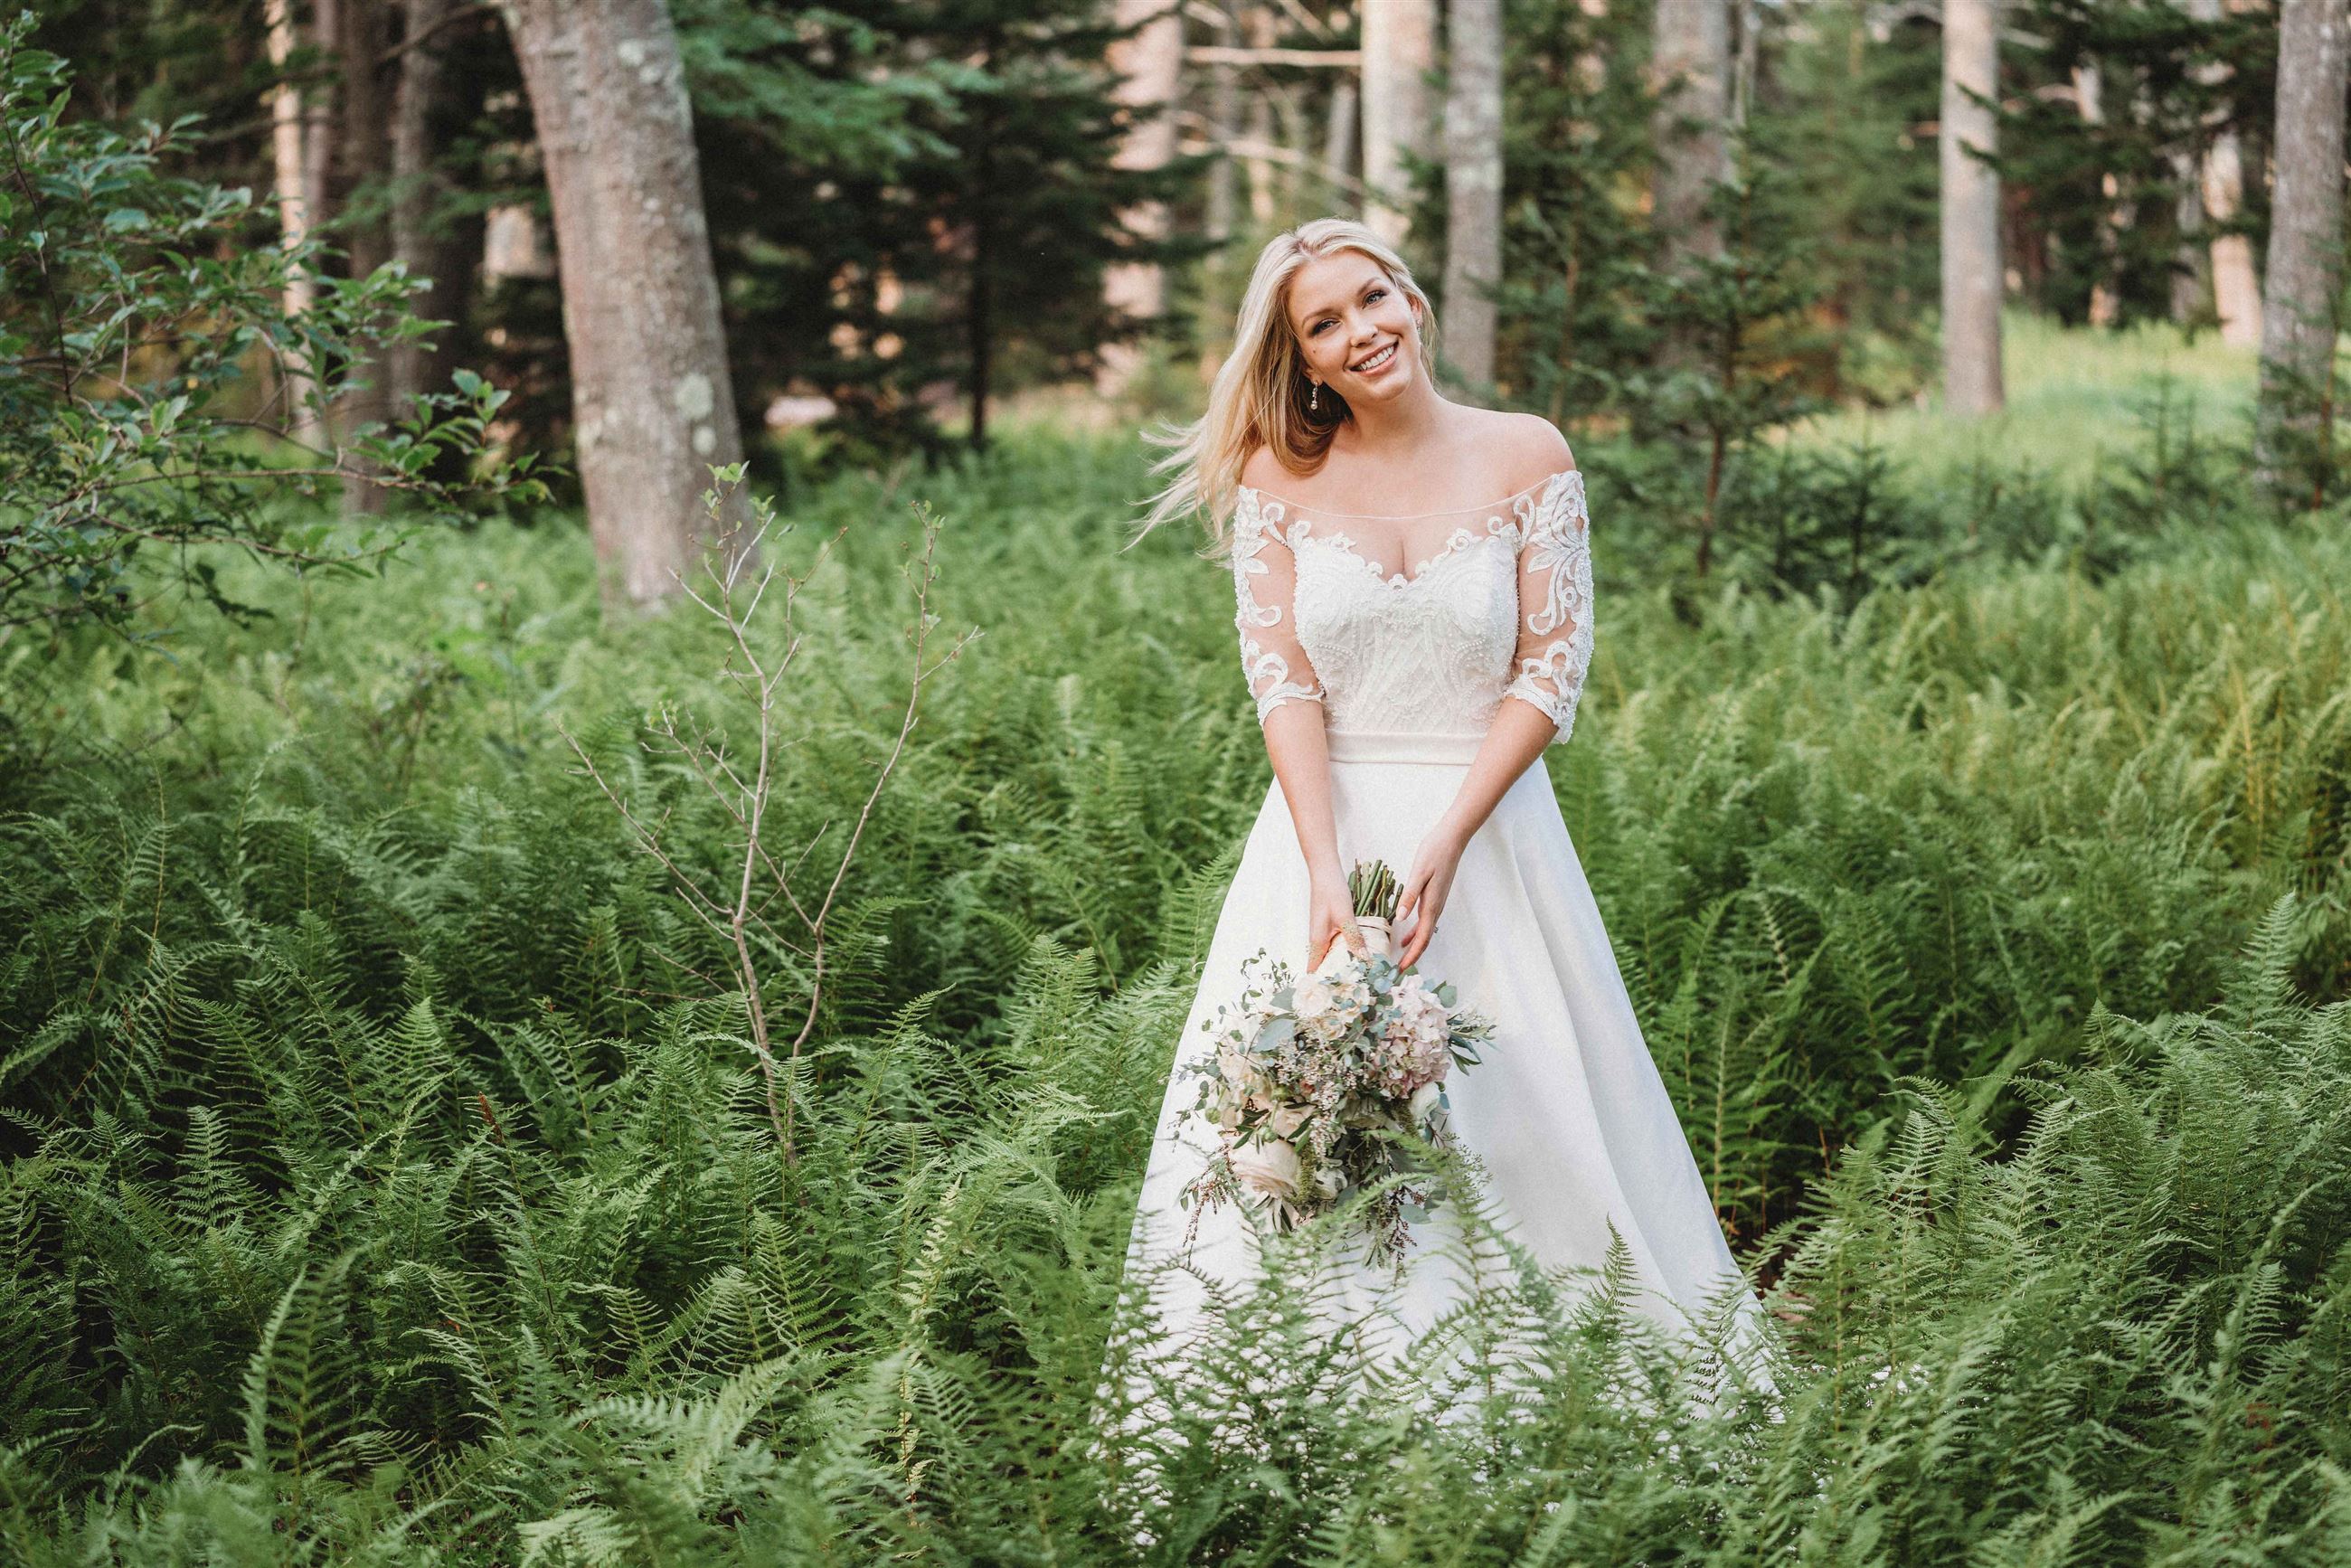 Smiling blonde bride in white wedding dress in forest